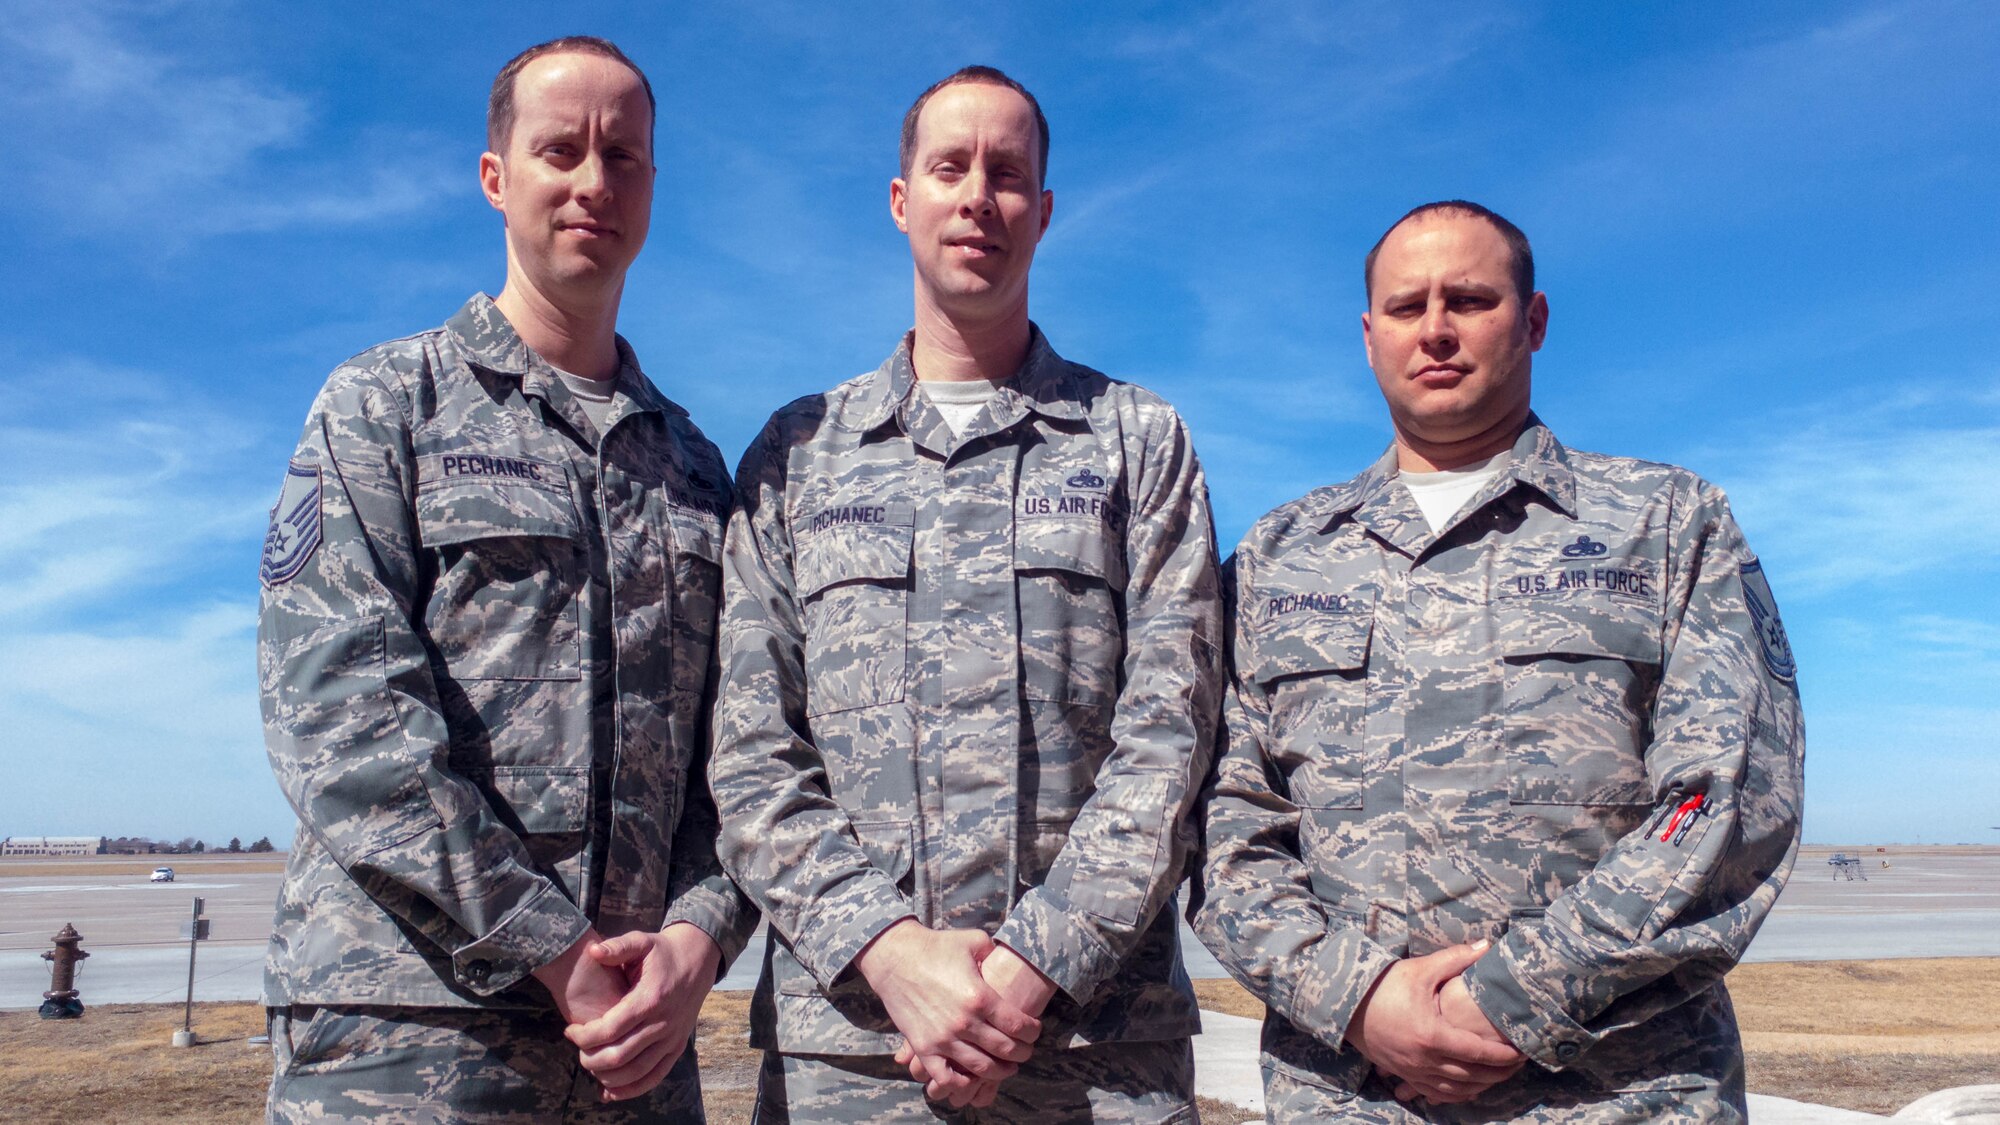 From left, Master Sgt. Brent Pechanec, 931 AMXS flight expediter, Master Sgt. Bryan Pechanec, 931 AMXS aircraft overall supervisor, and Master Sgt. Andrew Pechanec, 22 MXS Inspection Section crew chief, all serve at McConnell Air Force Base, Kan.